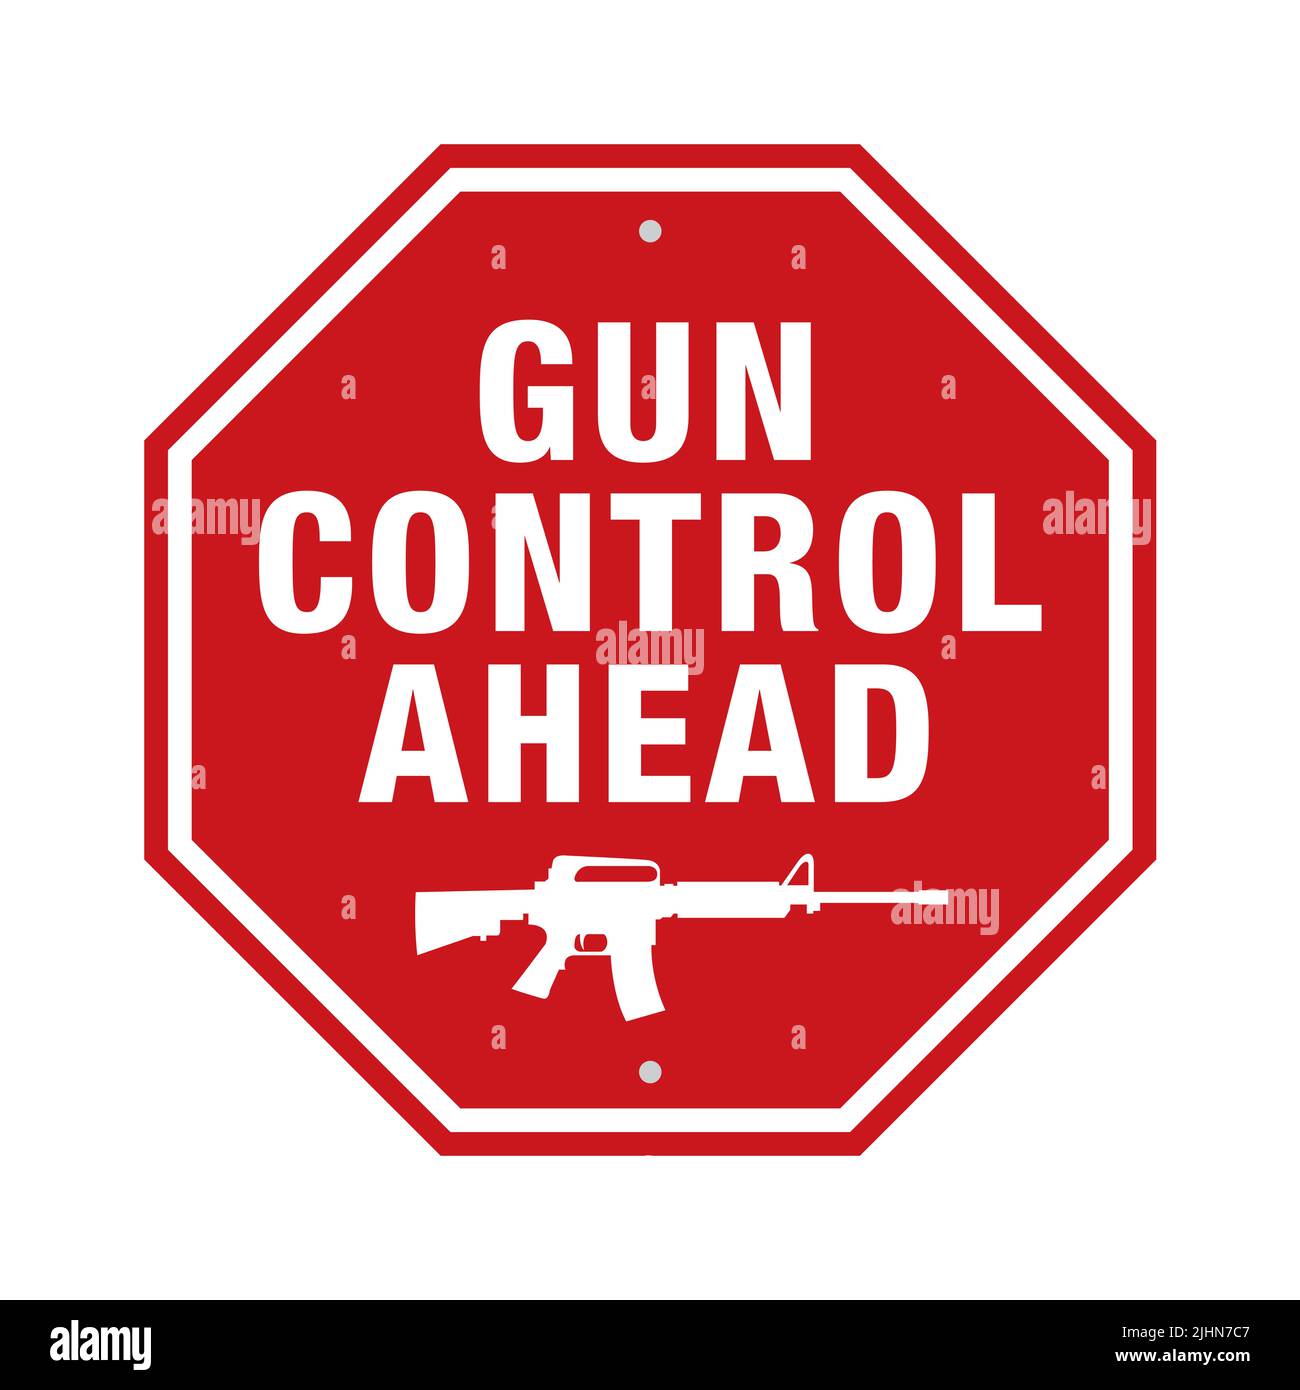 A red stop sign with the words GUN CONTROL AHEAD and an assault rifle message illustration. Stock Photo